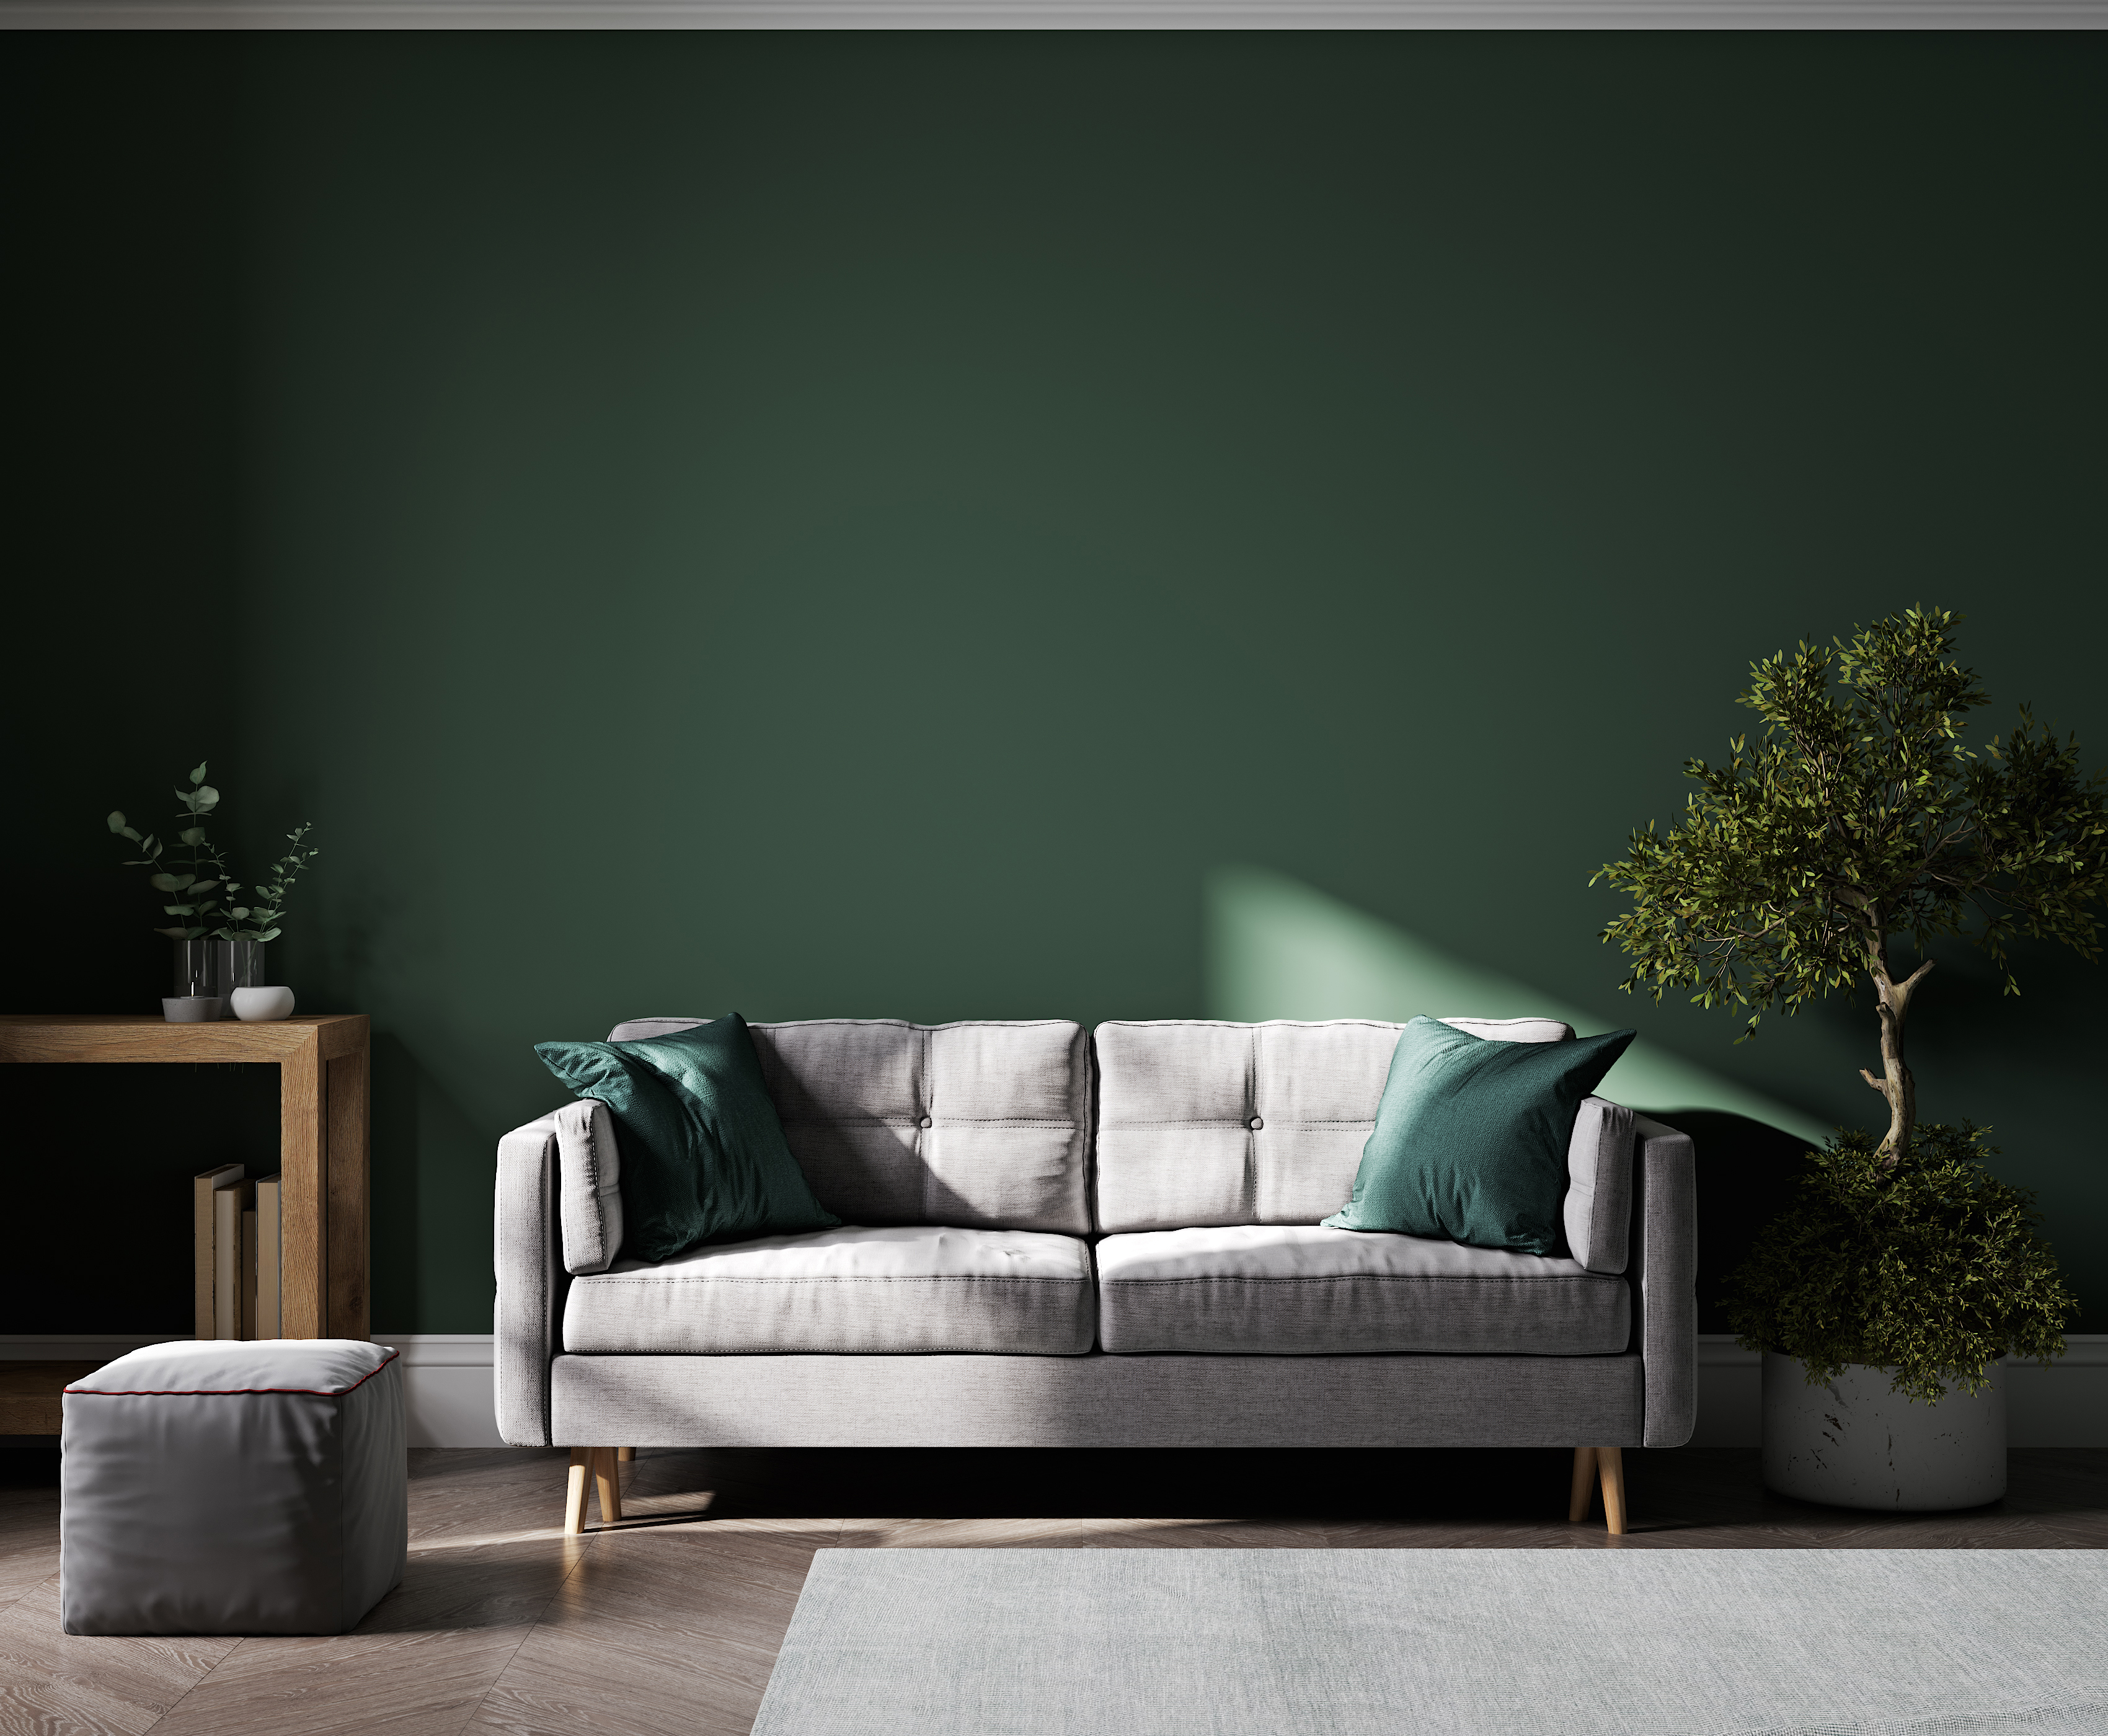 Dark green living room with grey sofa and plants